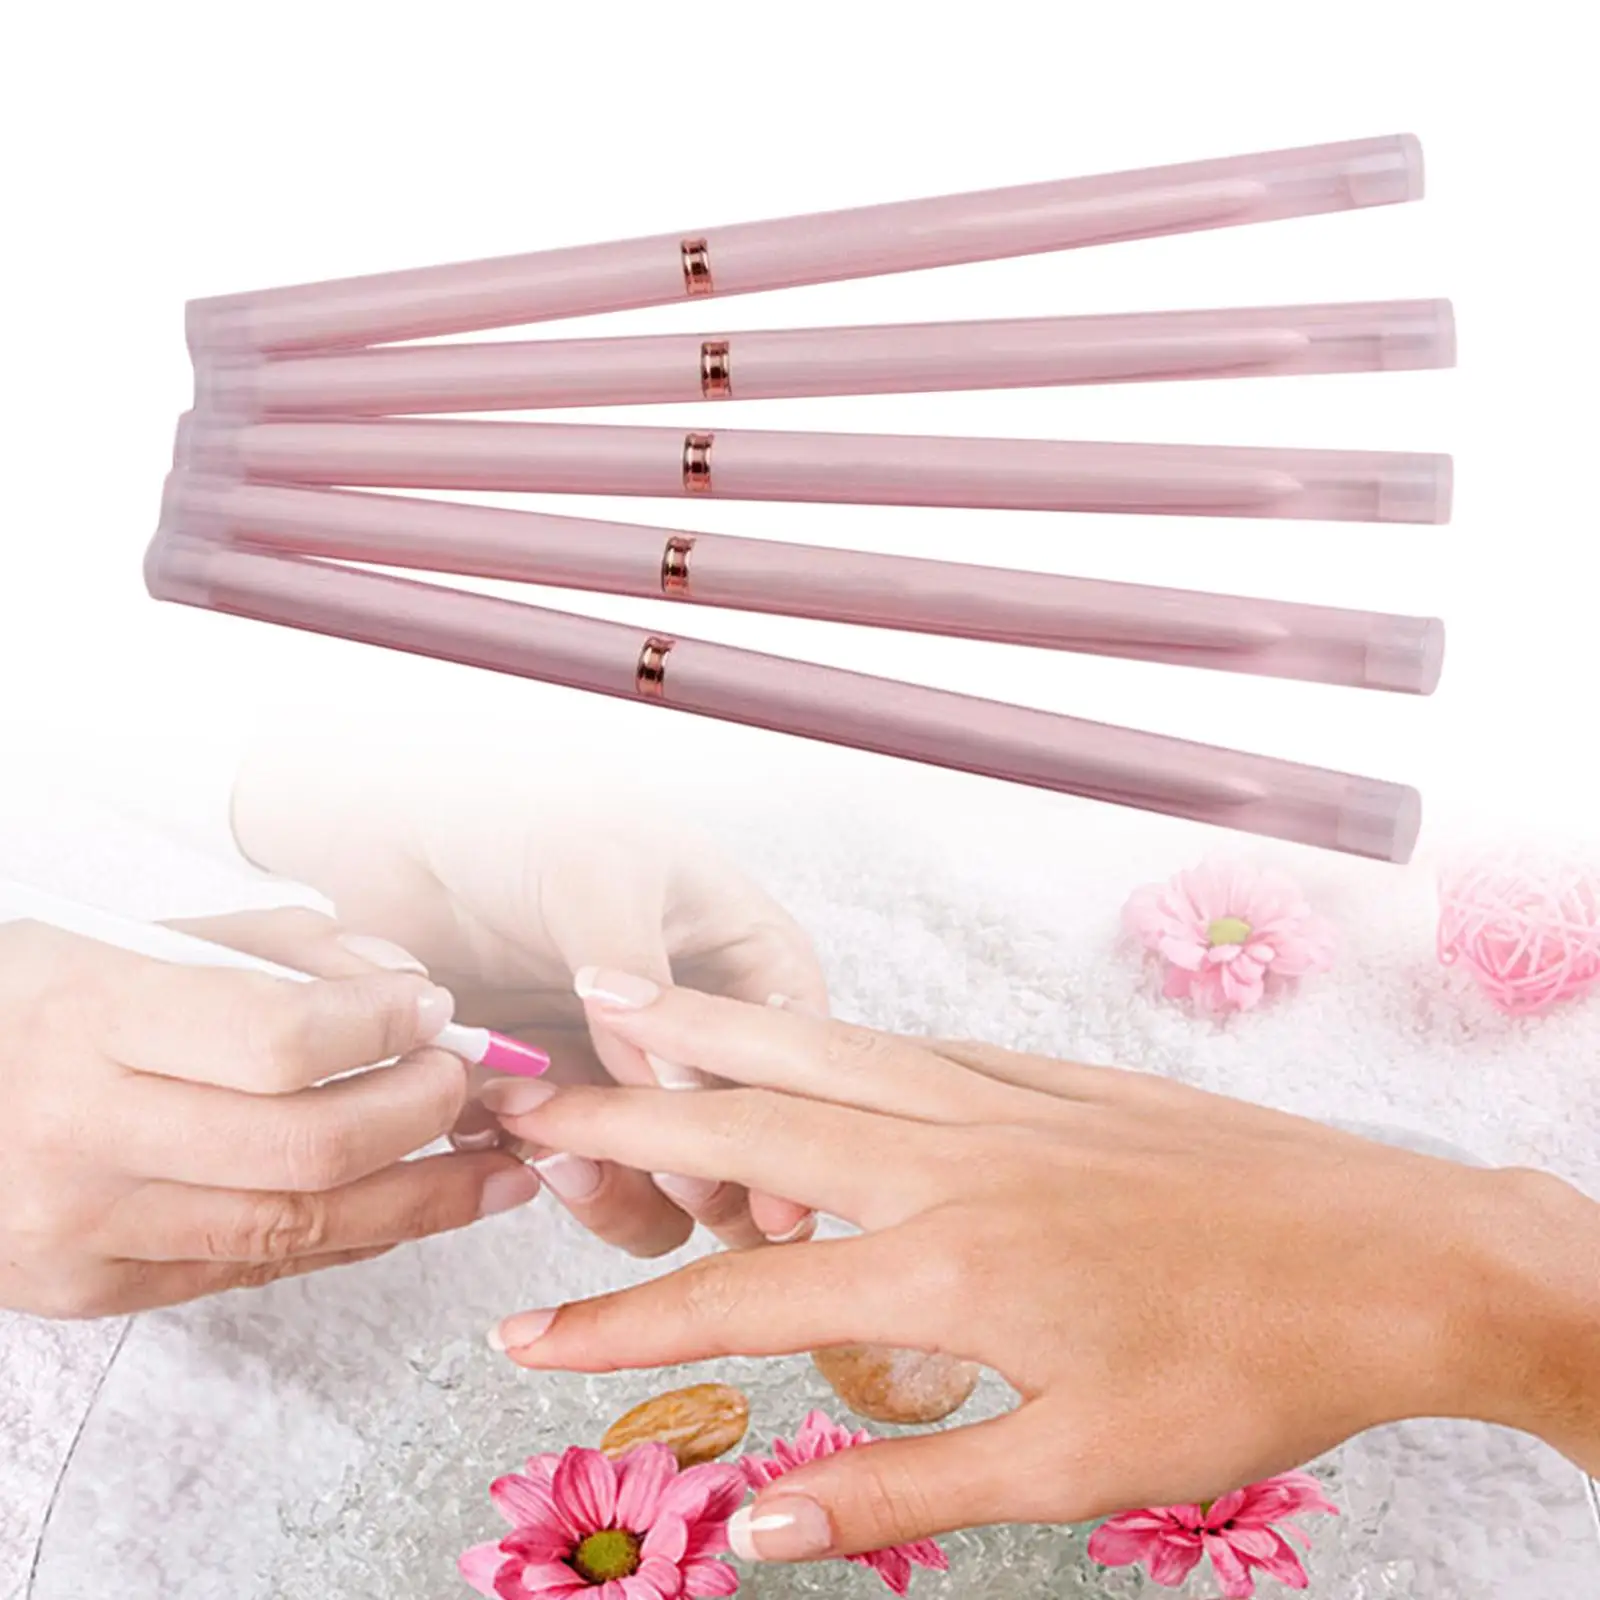 5 Pieces Nail Art Liner Brush Set for Nail Painting Drawing Fine Drawing Nail Art Design Brushes Tool Thin Details Pulling Lines